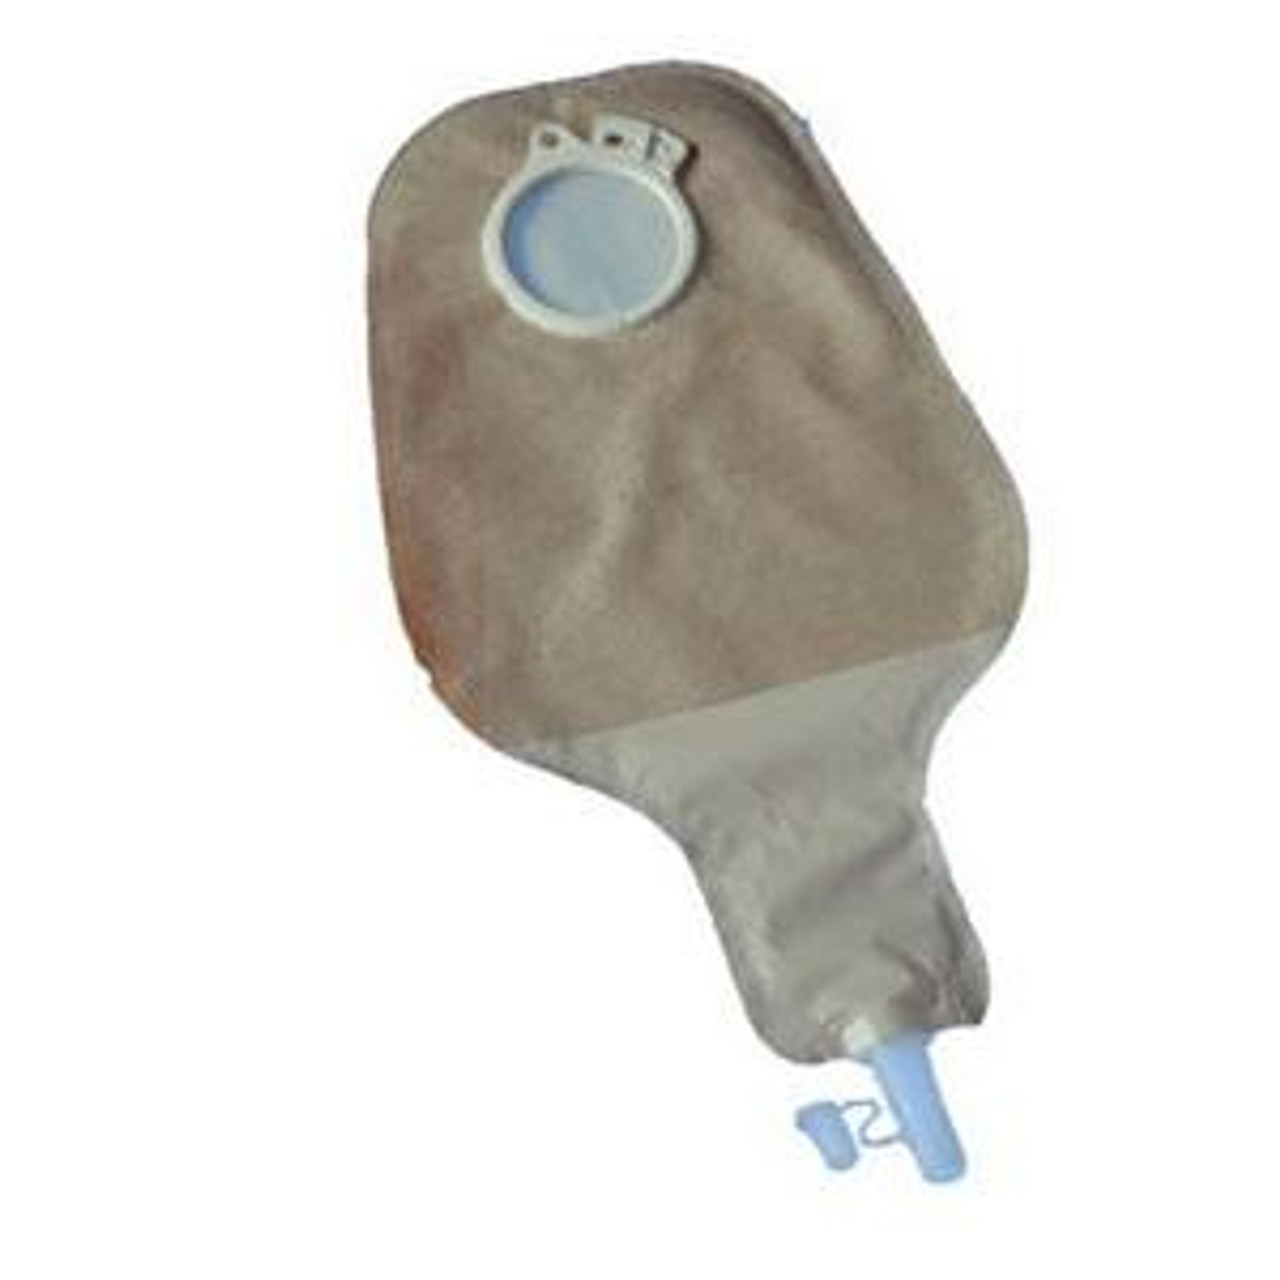 ASSURA OPAQUE HIGH OUTPUT Drainable Pouch, FLANGE SIZE 2 3/8" (60mm) BX/10 (COL-2847)